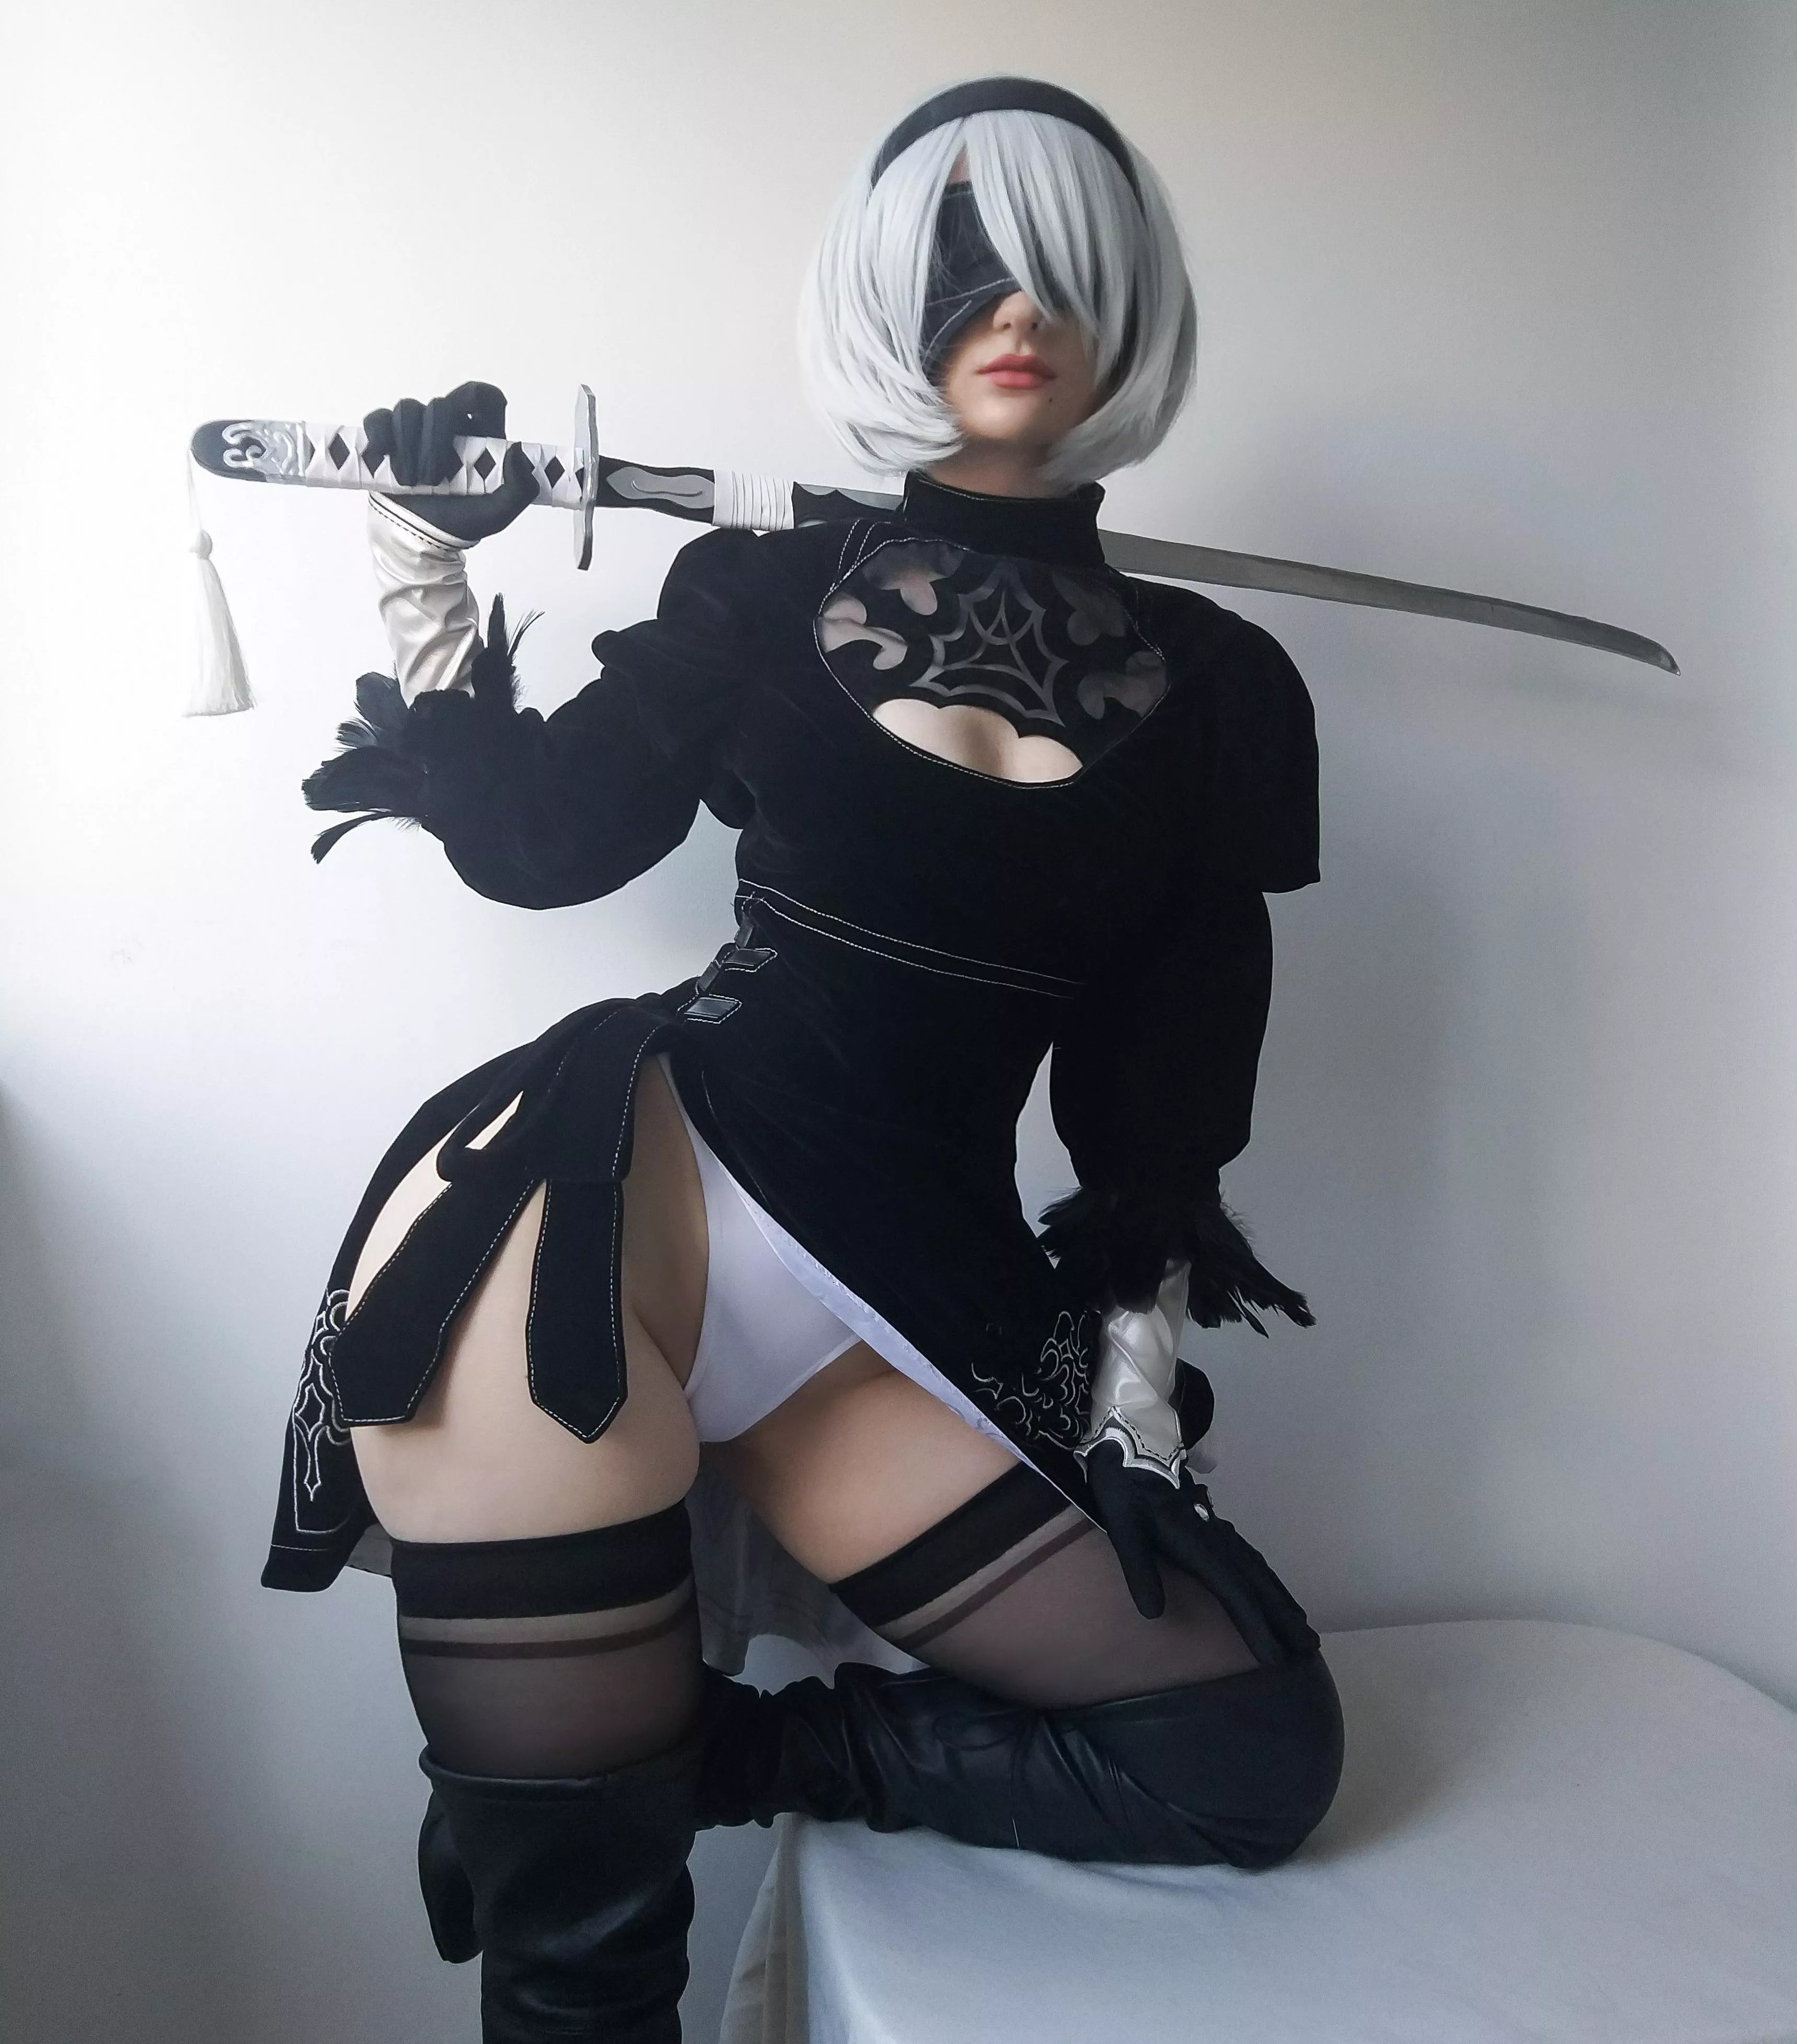 Nude cosplay 2b The Best